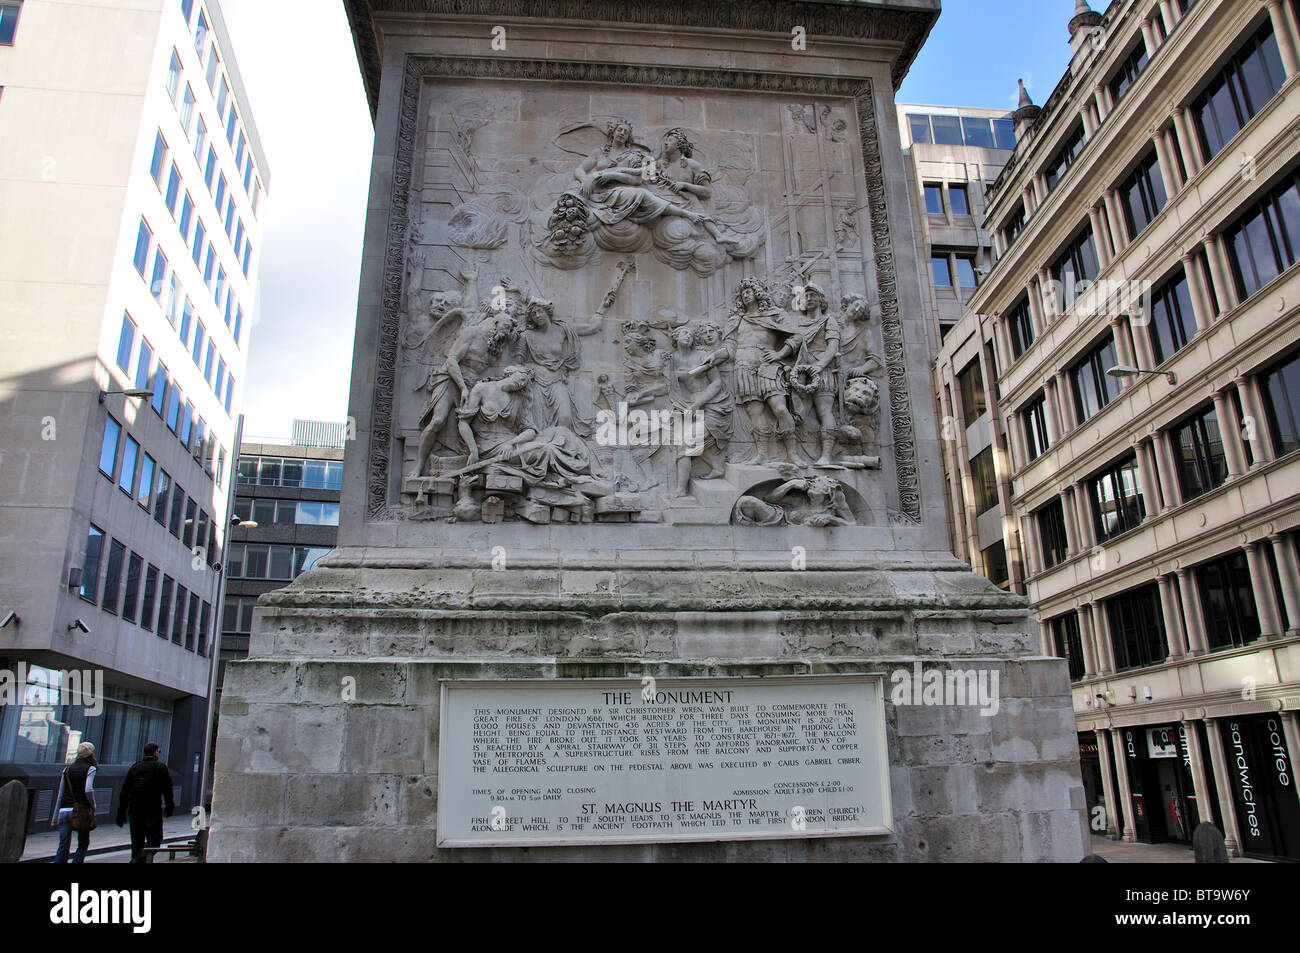 'The Great Fire of London' inscription on The Monument Tower, City of London, Greater London, England, United Kingdom Stock Photo